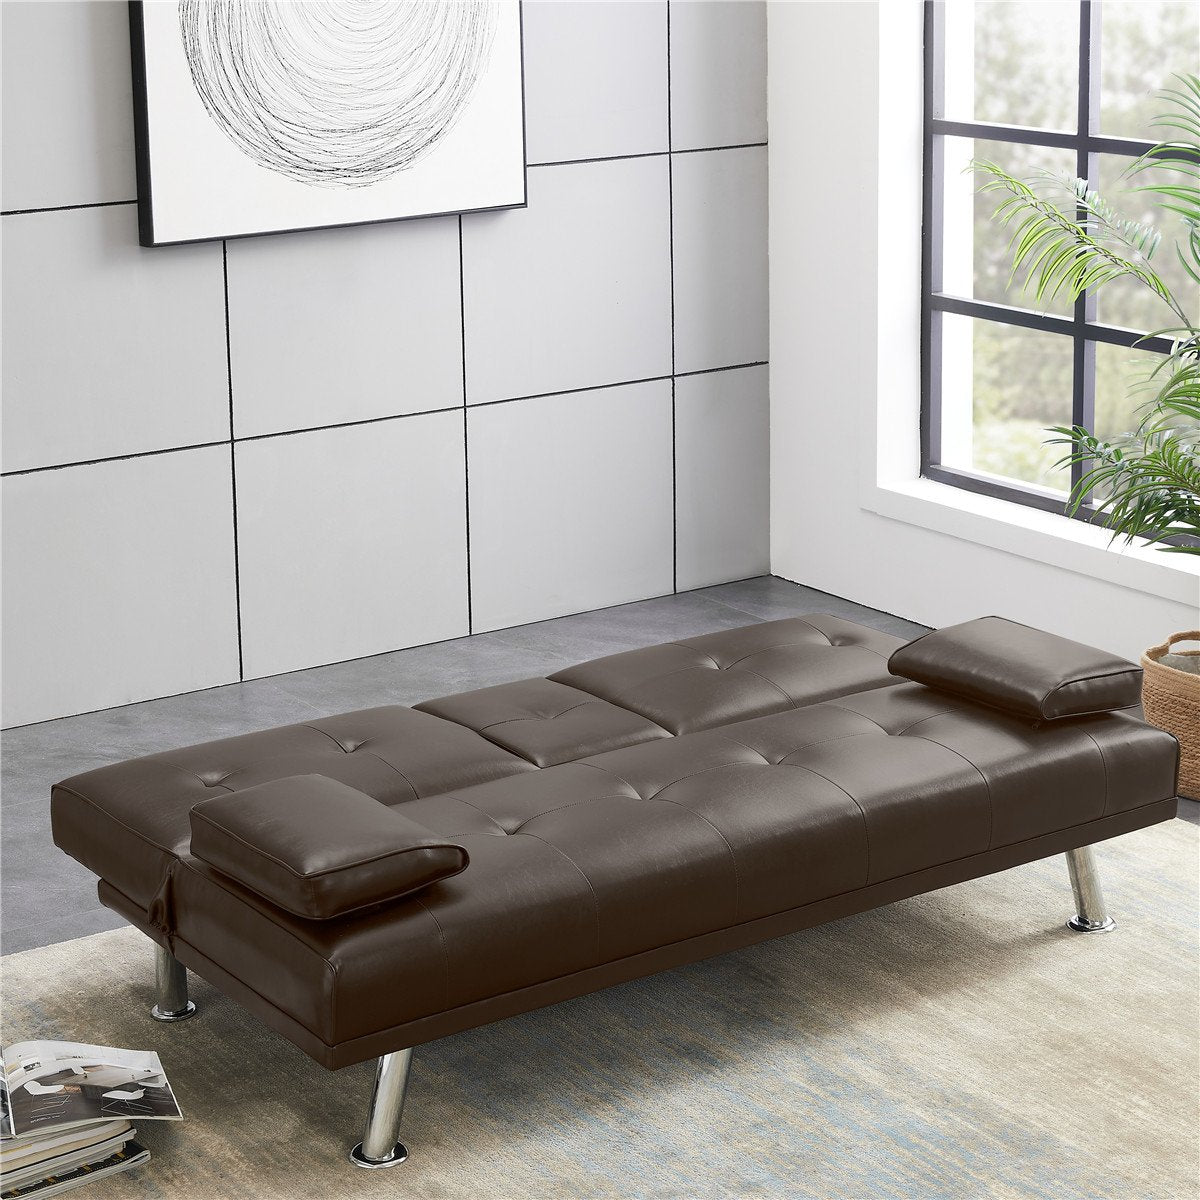 Convertible Futon Sofa Bed Recliner Couch